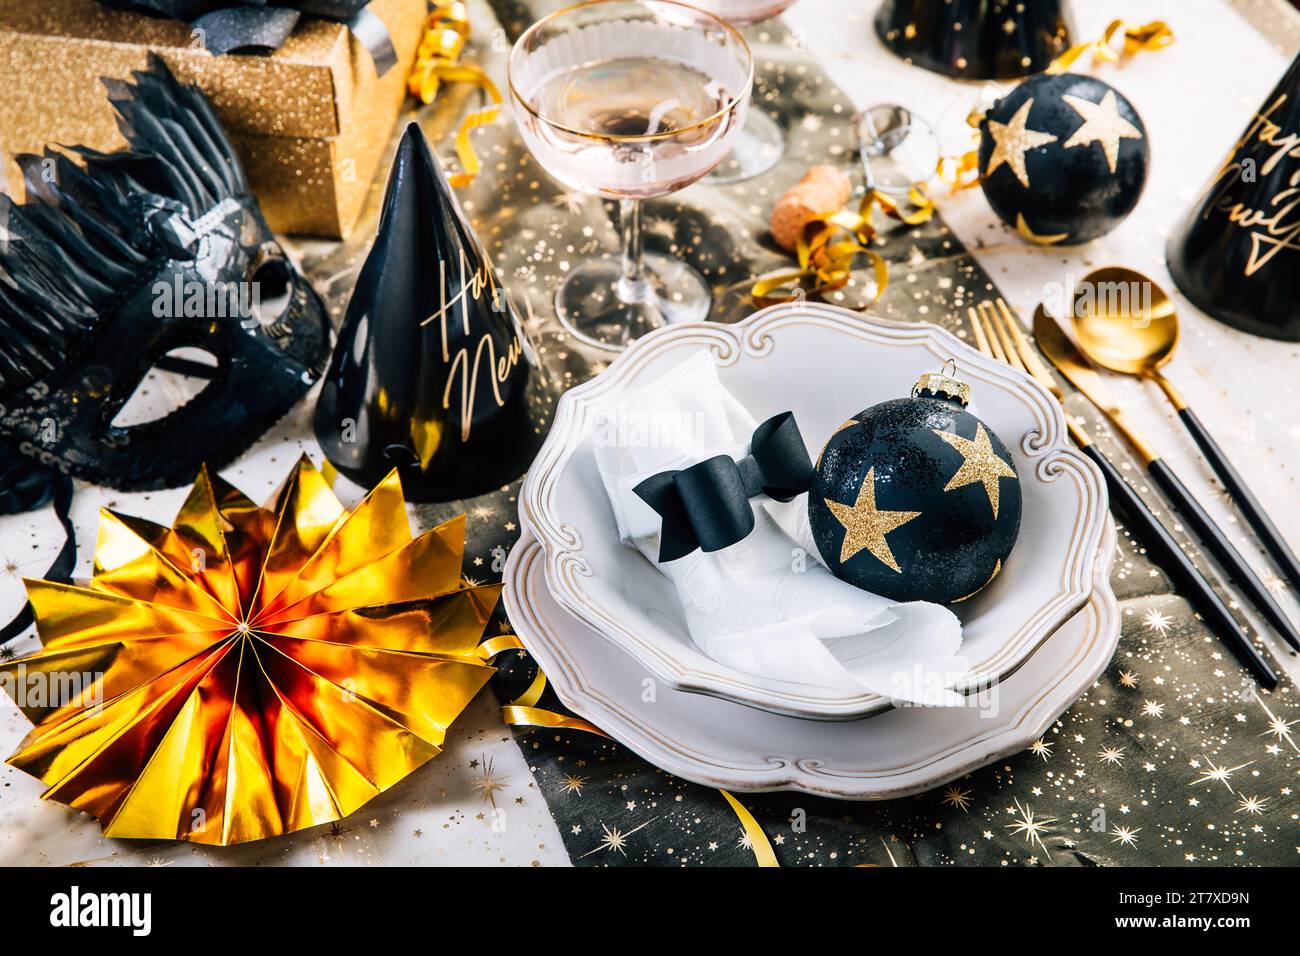 Christmas And New Year Holiday Table Setting with Champagne. Stock Photo